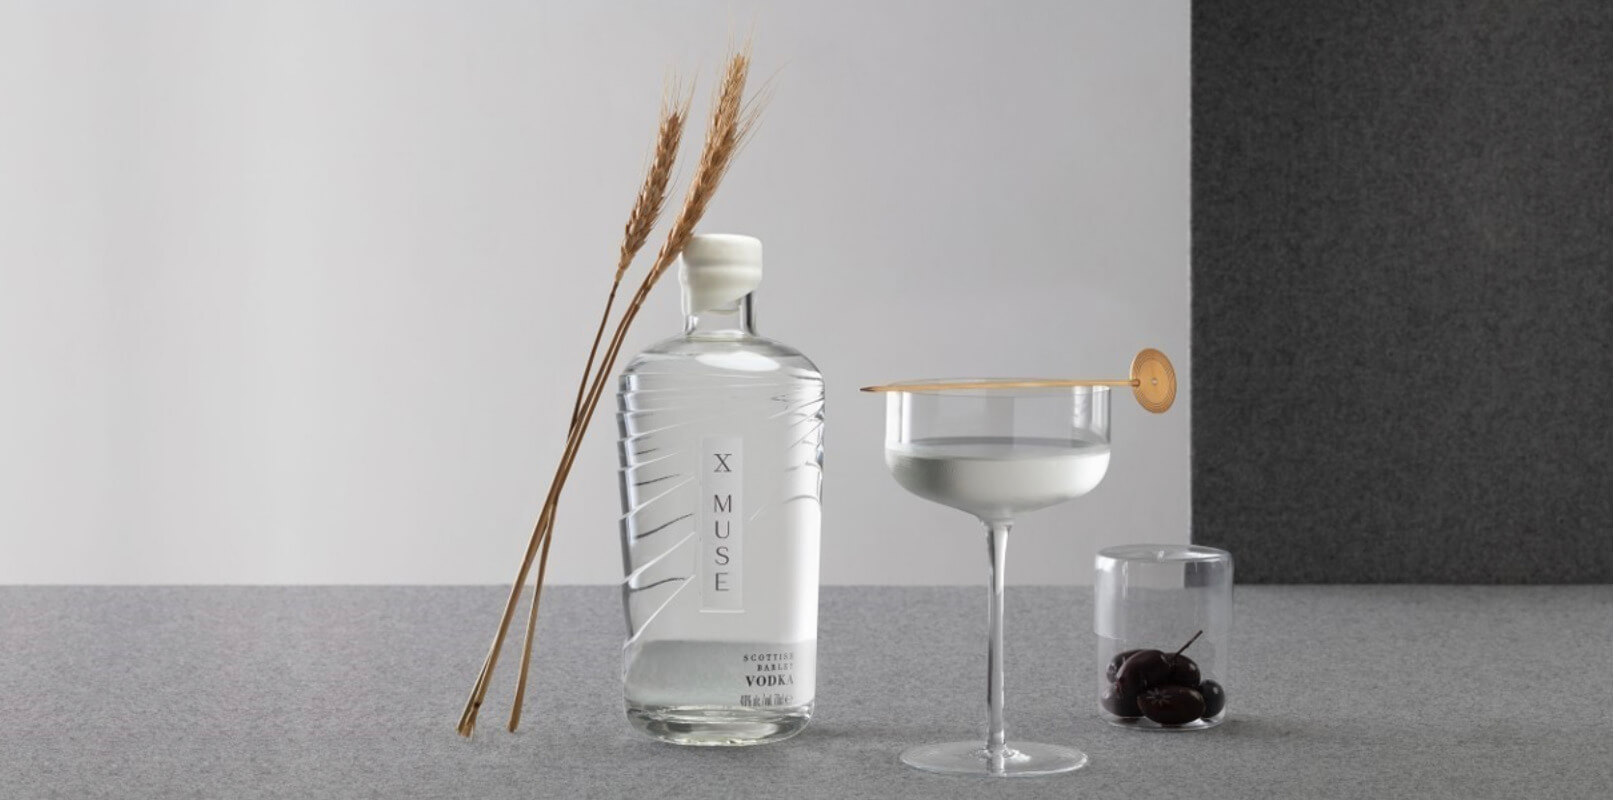 Sip on Something New with Our First-Ever Blended Barley Vodka